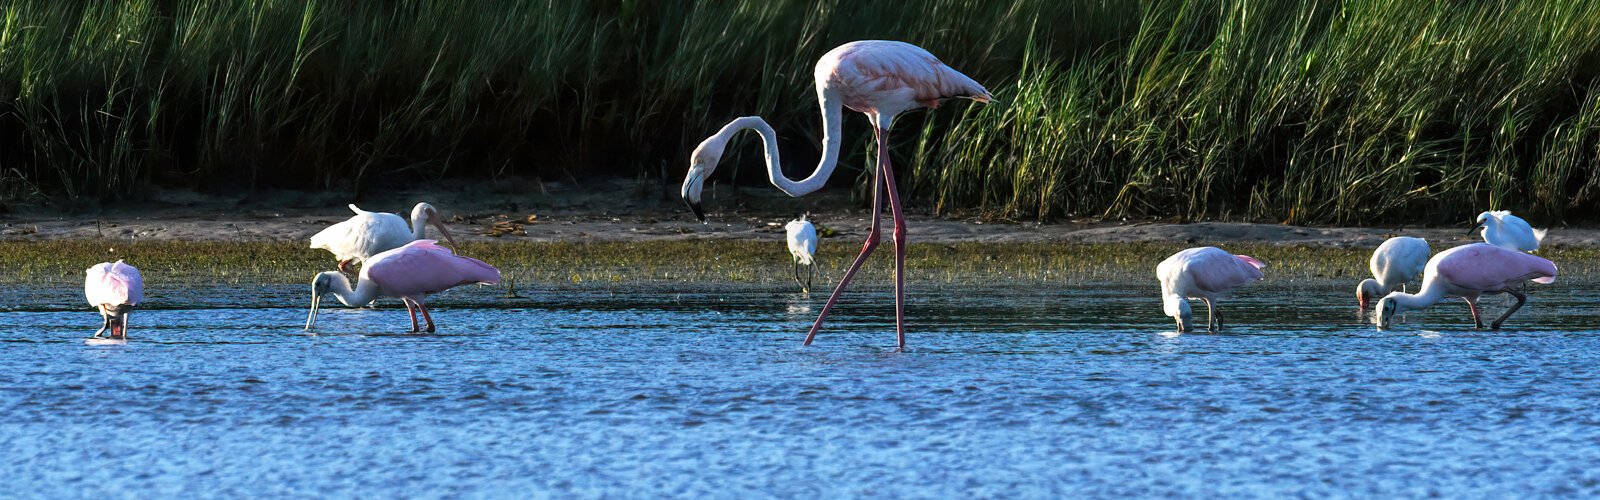  In Fort De Soto Park, this tall male flamingo mingled with roseate spoonbills, the main pink birds of Florida often mistaken for flamingos when in flight.